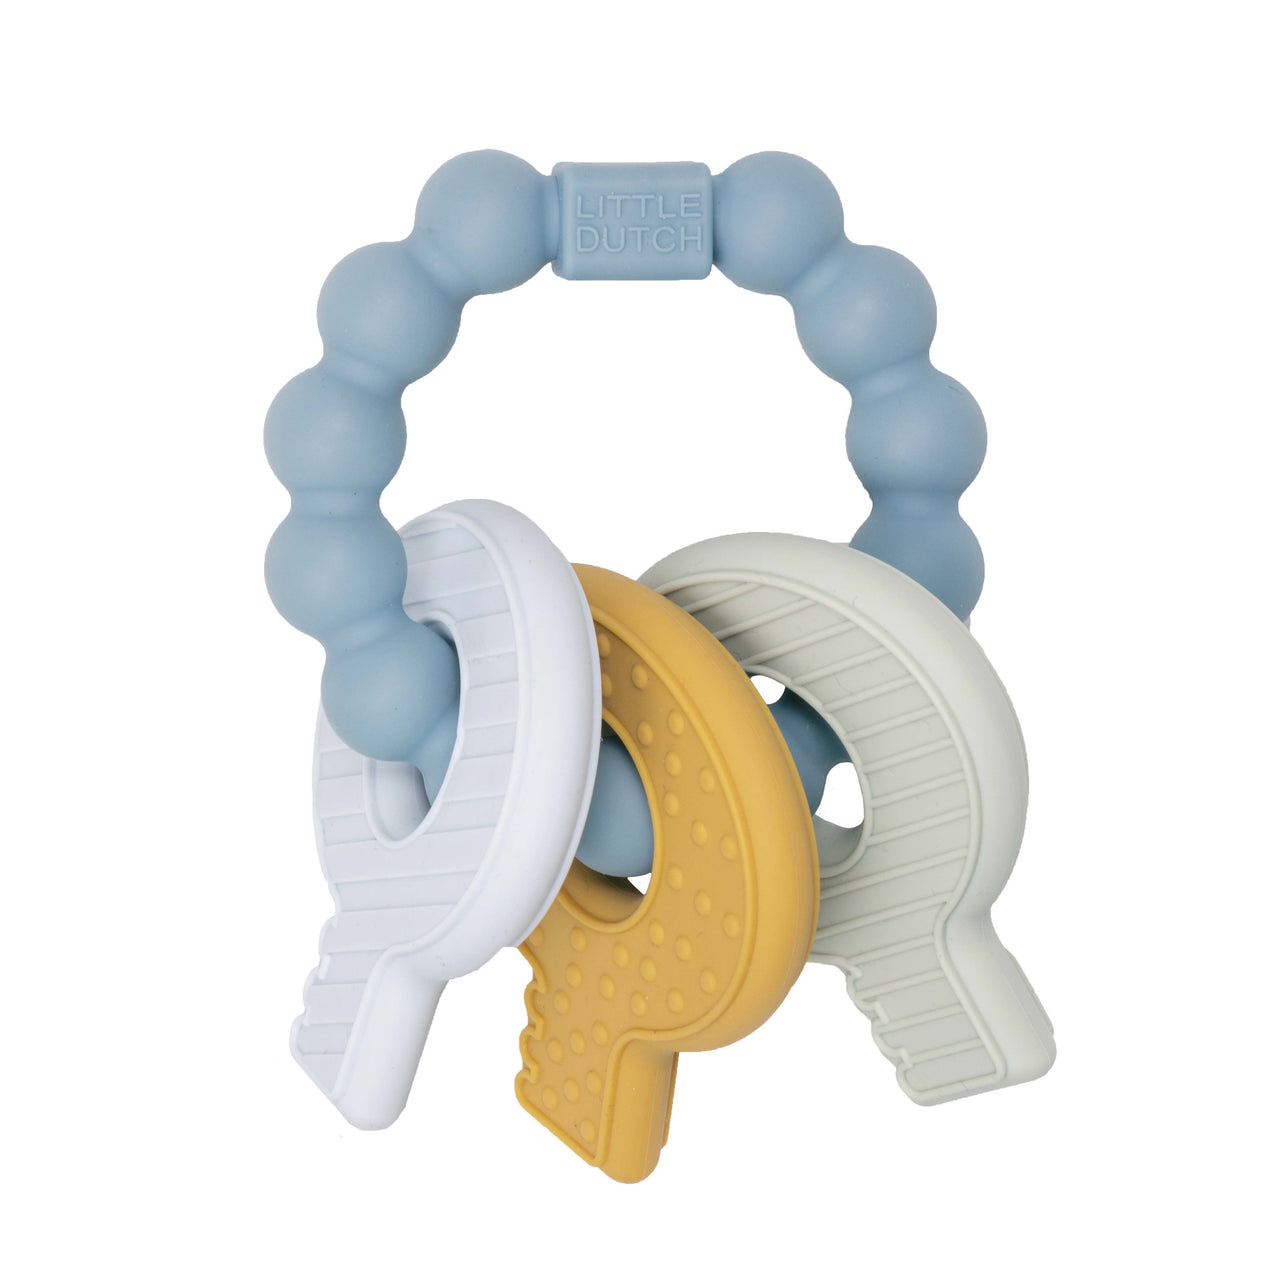 The appearance of the first teeth is a milestone but not always comfortable for your baby. To soften the pain we have created this multifunctional teething toy in the shape of a keychain. It is multifunctional: it’s a fun toy and it will provide soothing comfort and helps stimulate the eruption of your baby’s new teeth. 